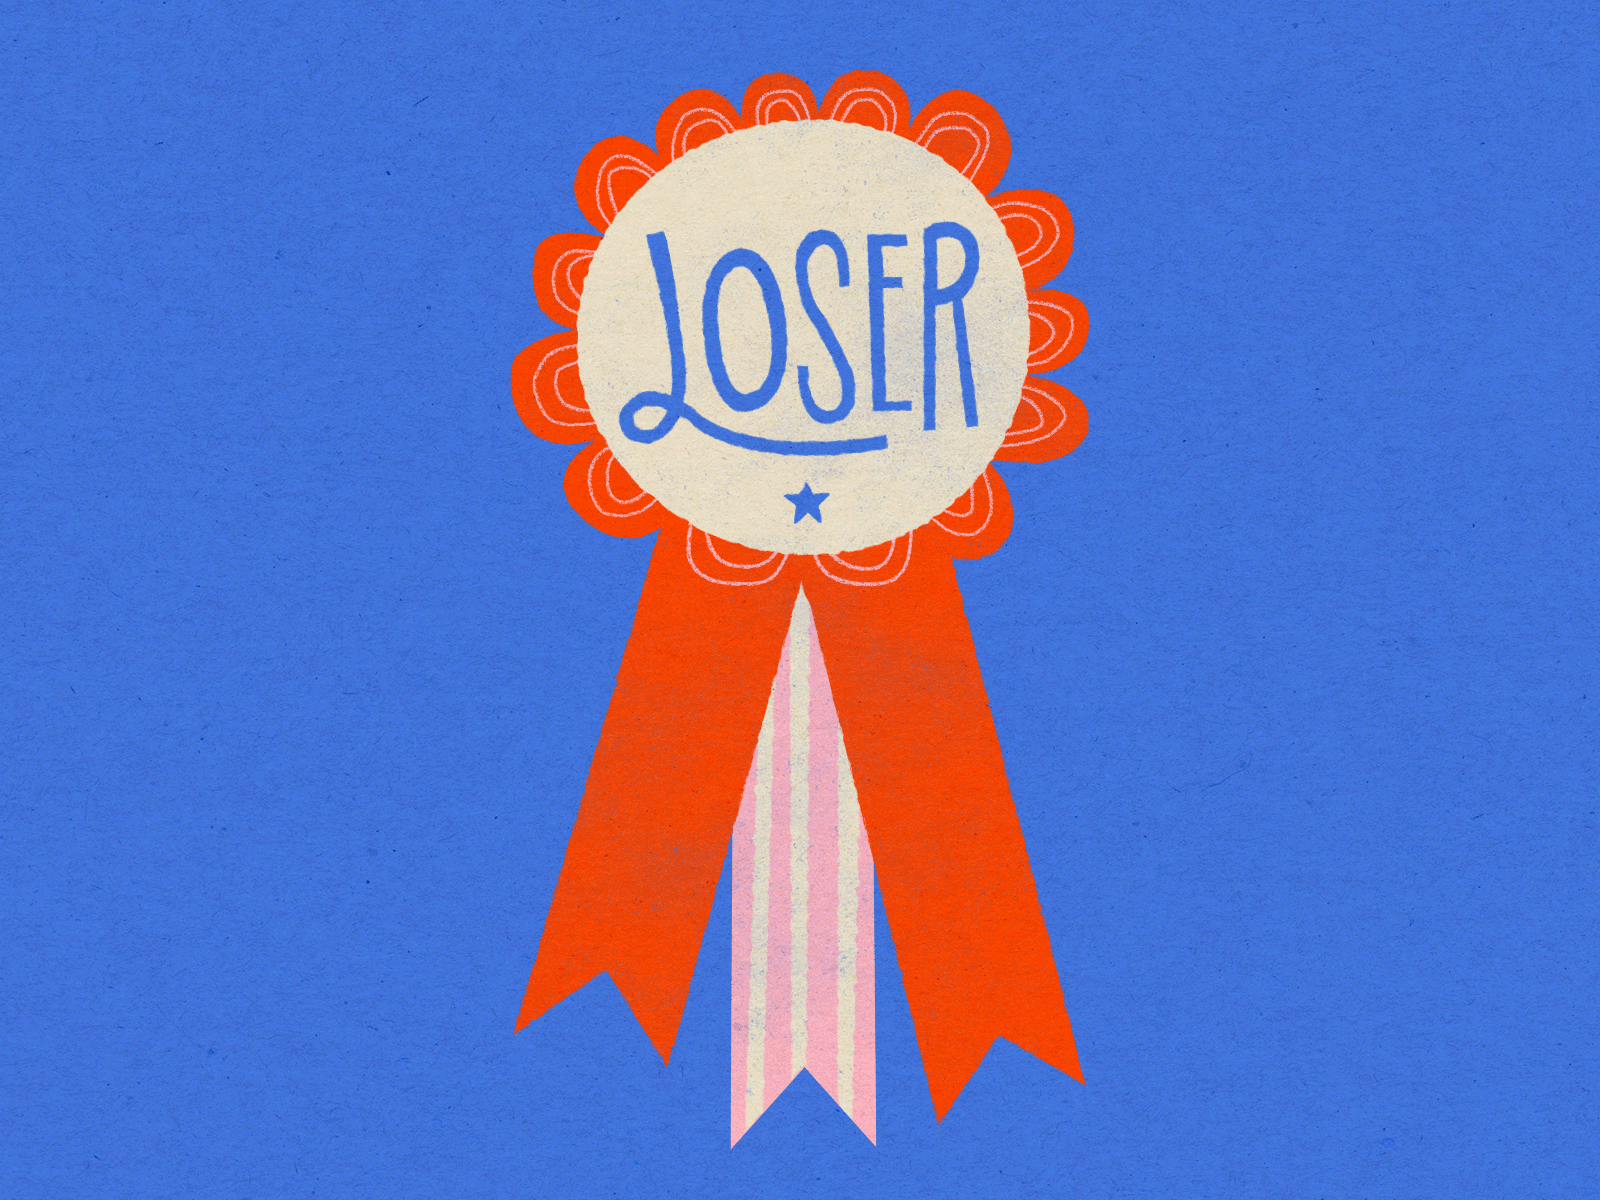 It's okay to be a loser. america award design doodle elections2020 illustration lettering loser texture usa vector